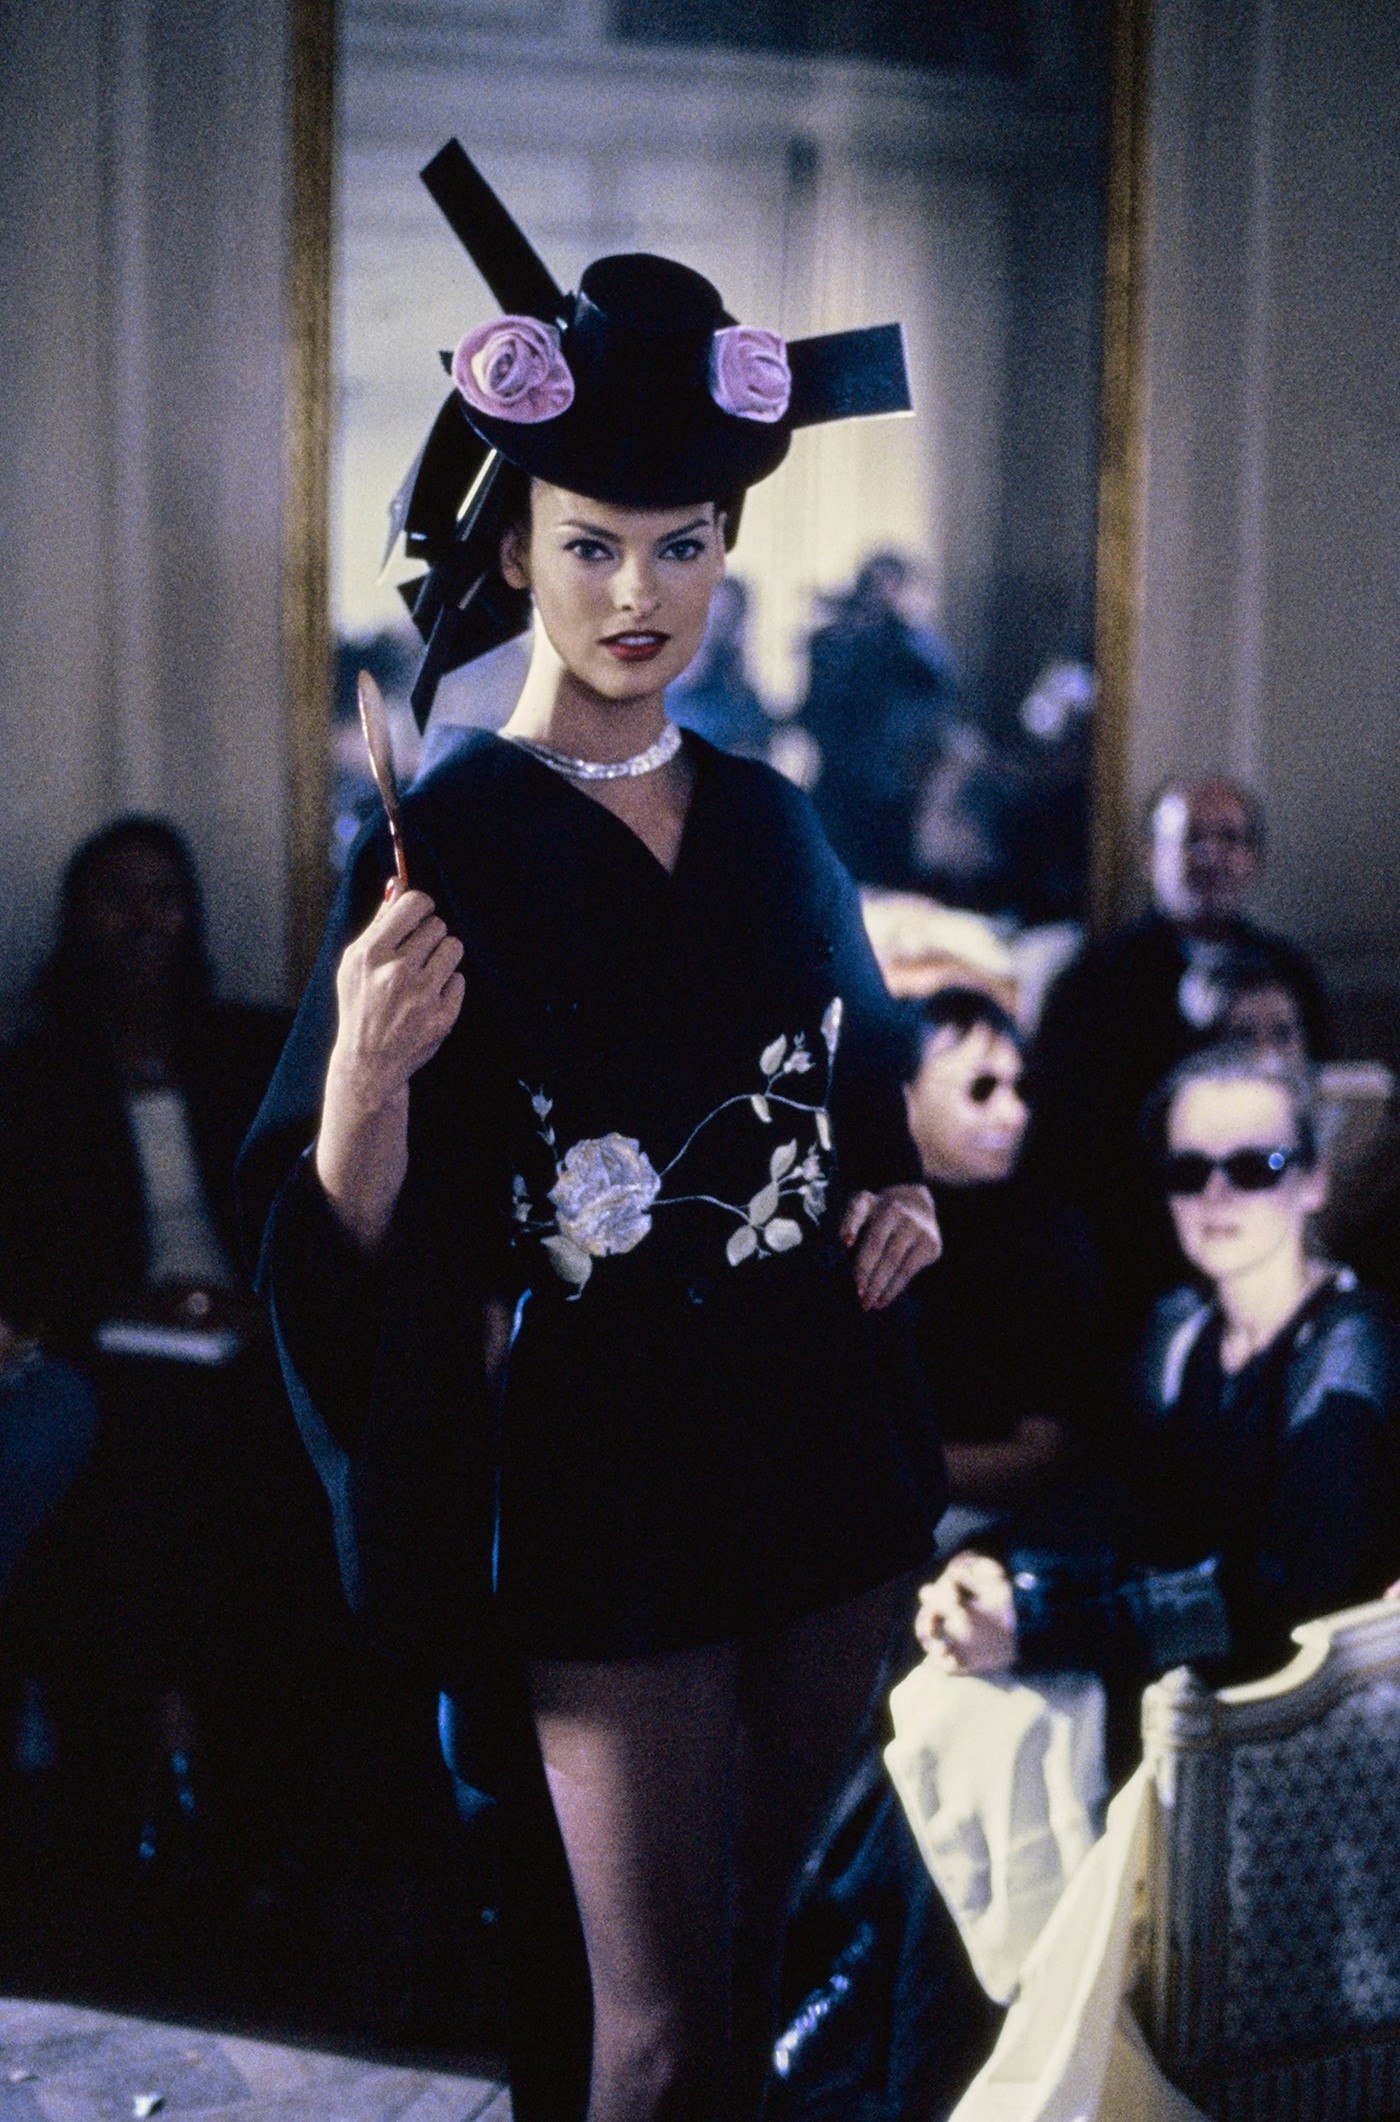 The Impact of John Galliano's A/W94 Japonisme Collection